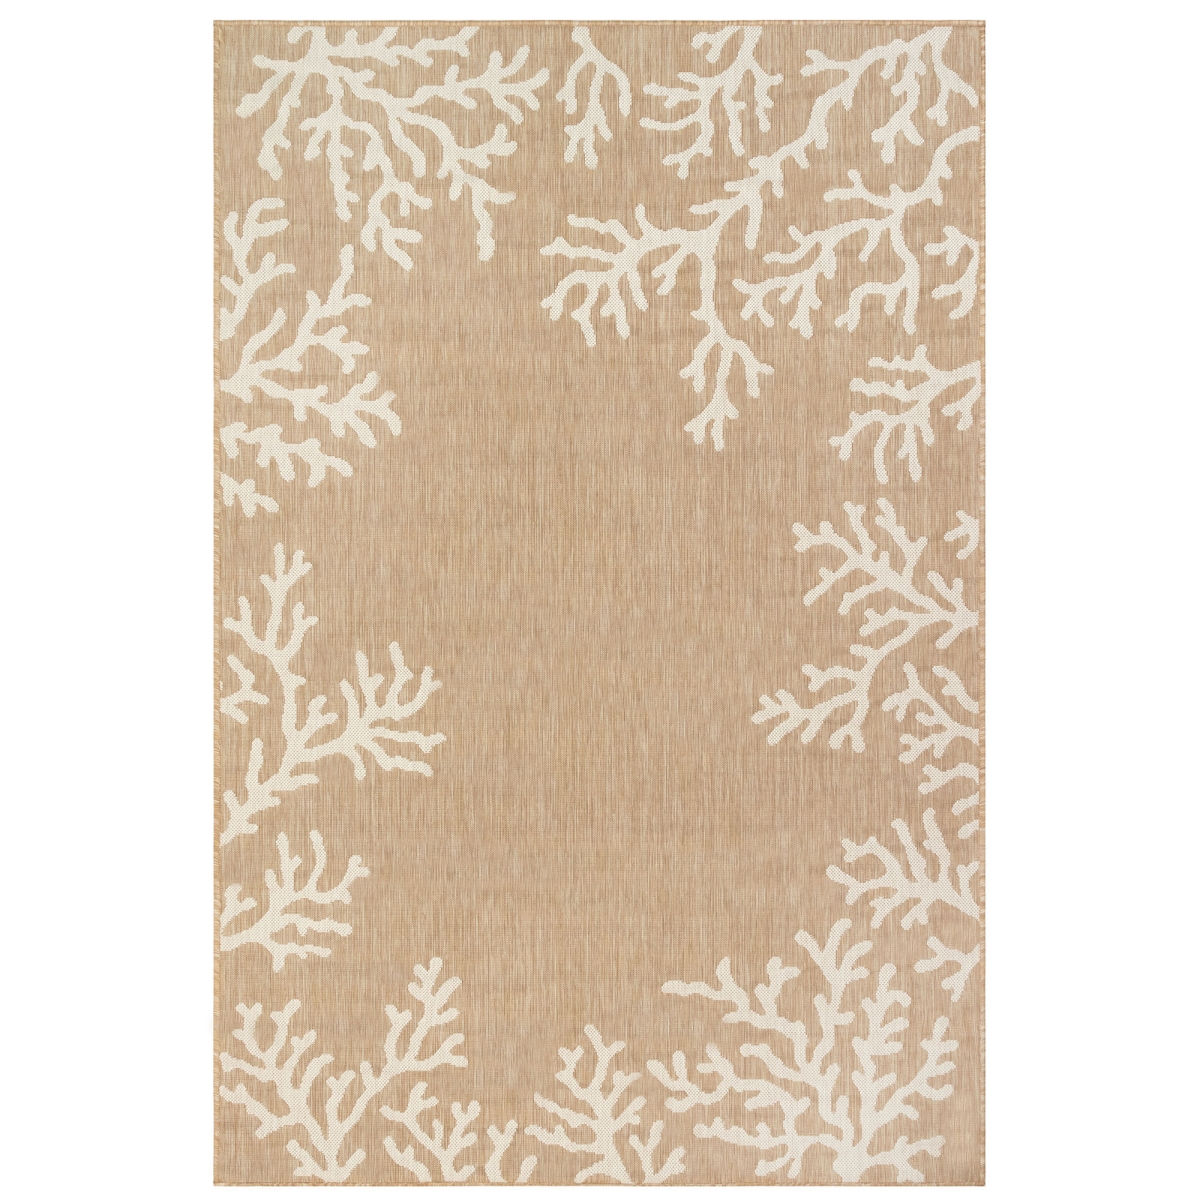 Cre69844812 Liora Manne Carmel Coral Border Indoor & Outdoor Rug, Sand - 6 Ft. 6 In. X 9 Ft. 4 In.